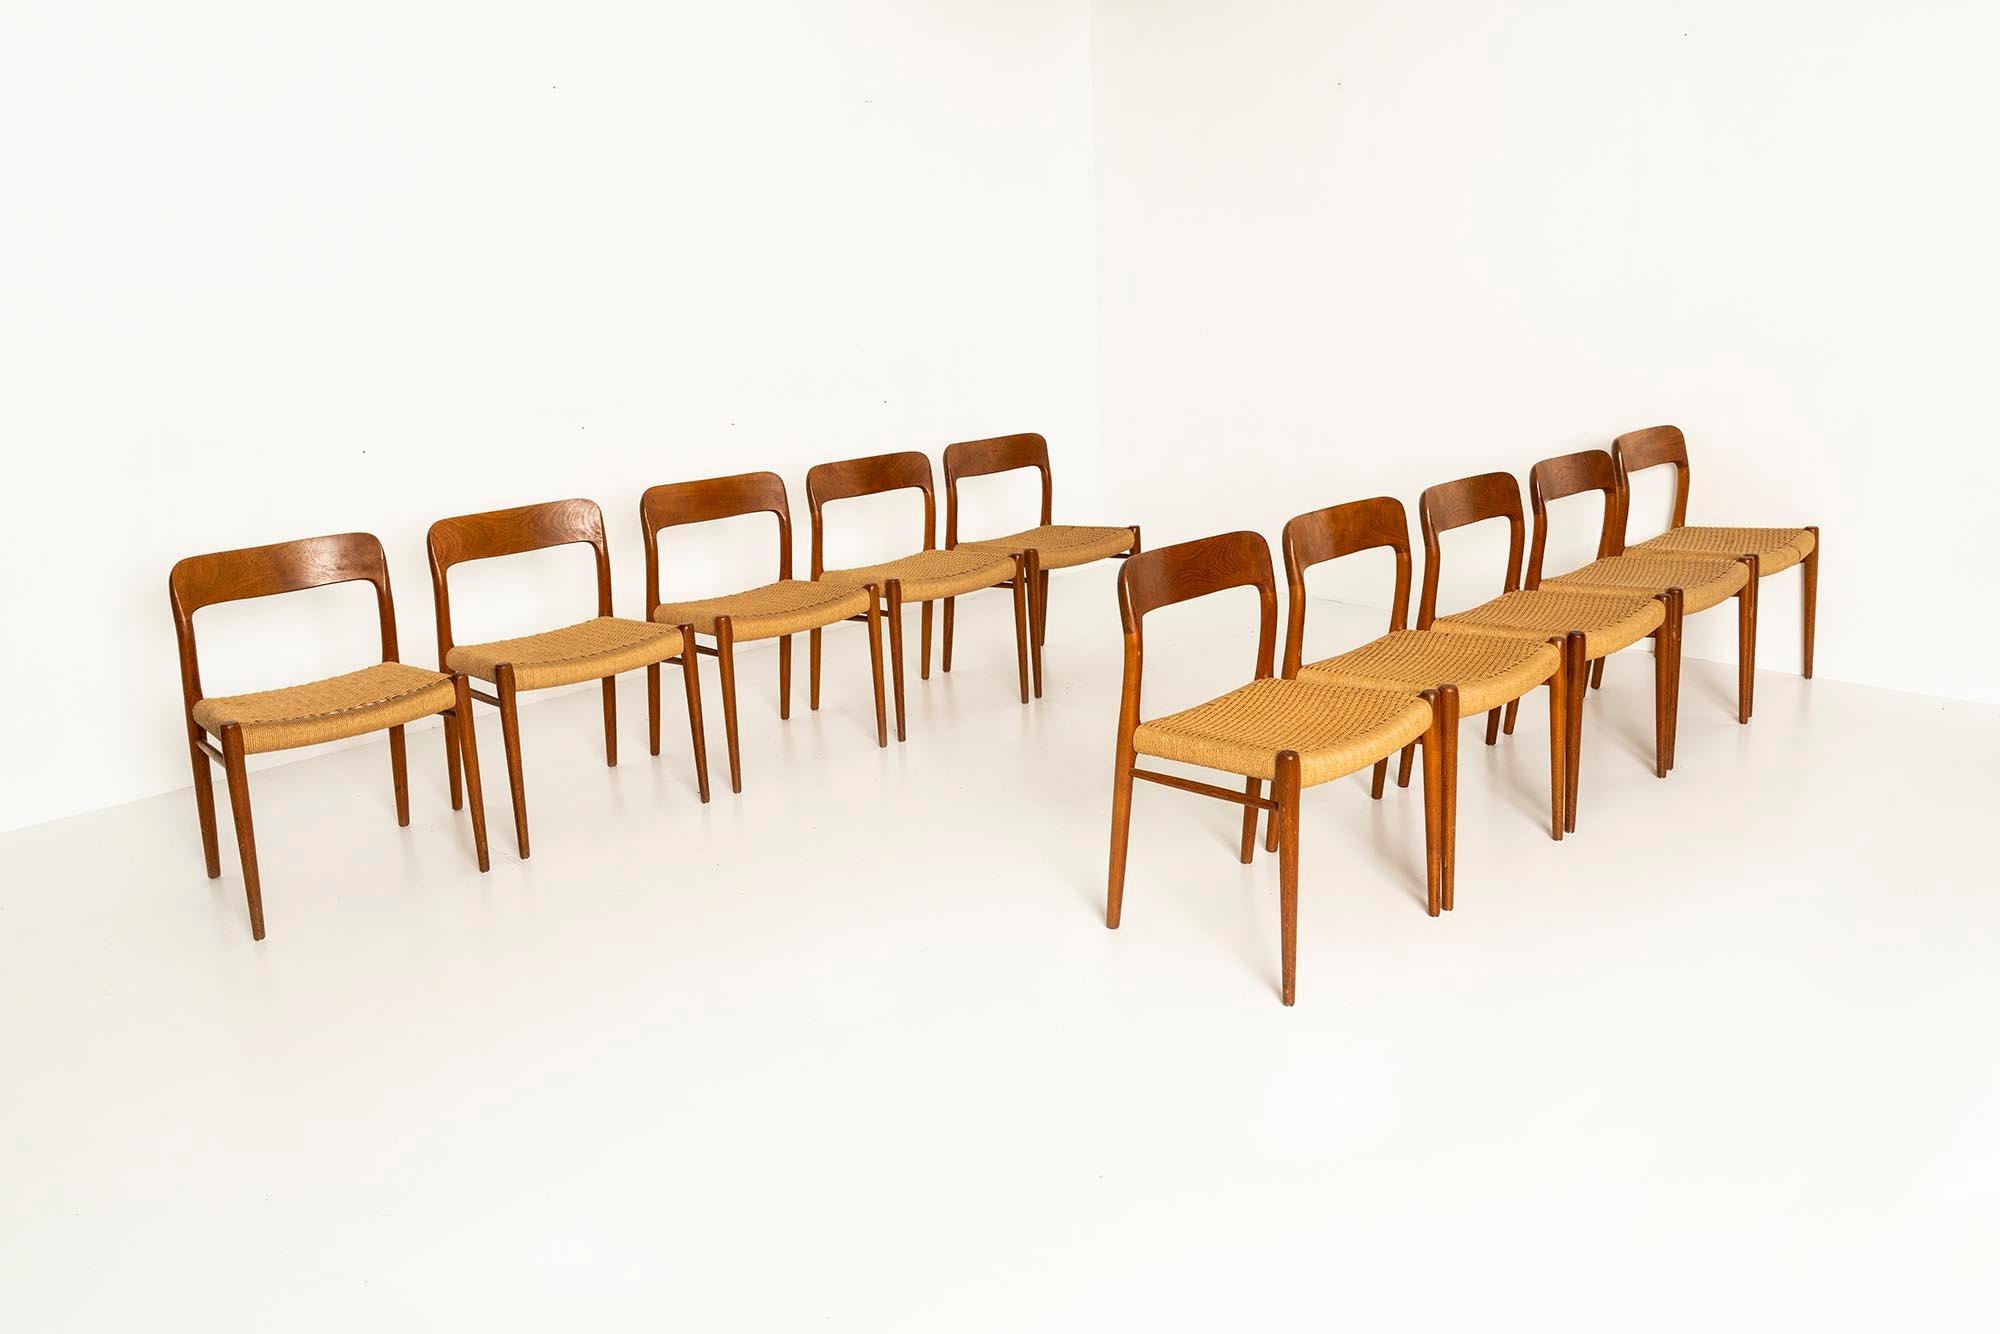 Model 75 is one of Niels Otto Møller's first dining room chairs in the 